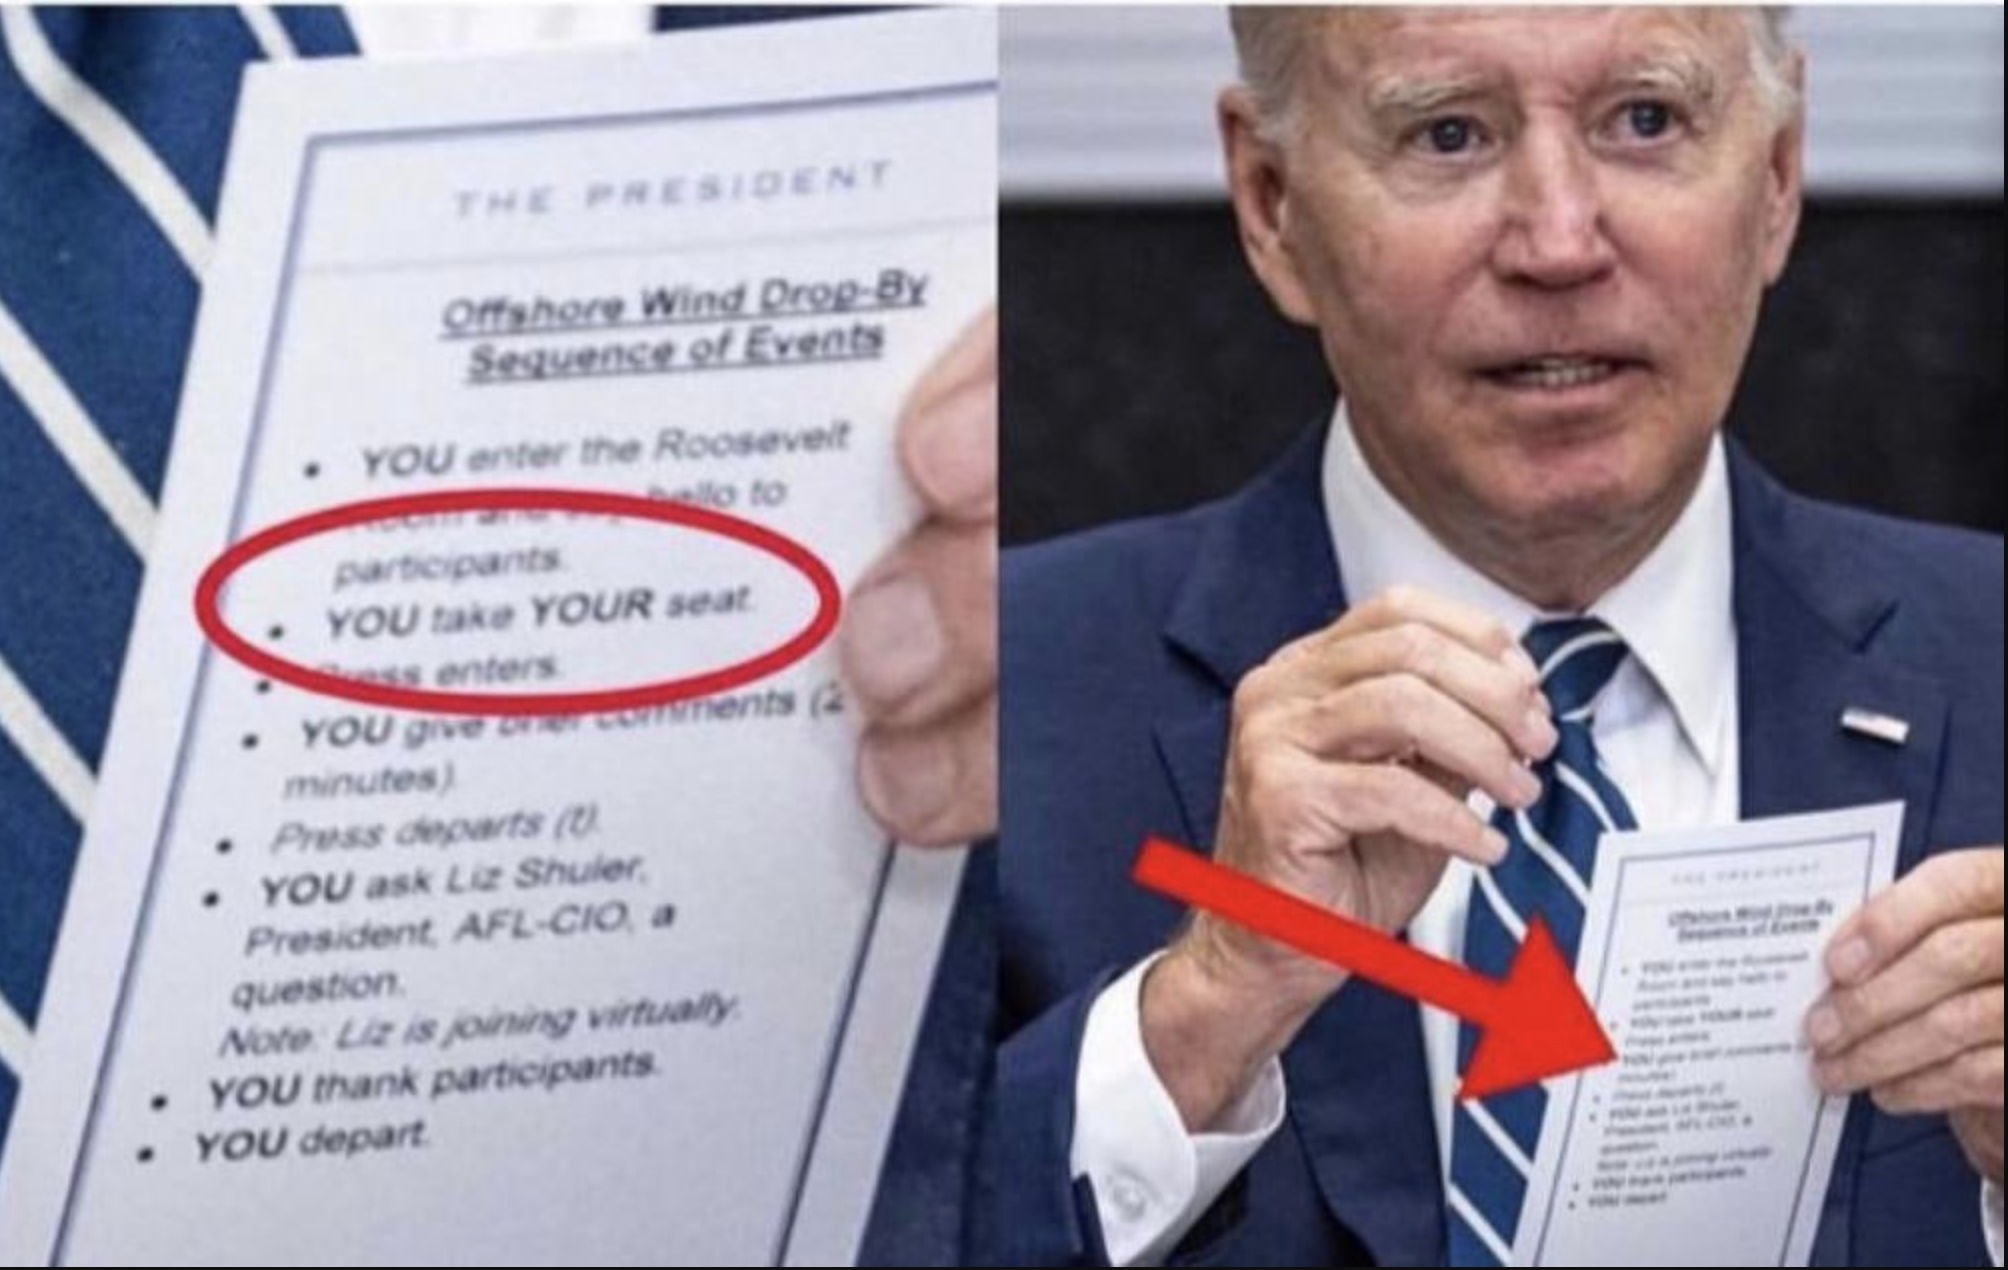 A close-up of the cue card held by Biden at a meeting with wind-energy leaders in the White House on June 23. Image cropped by Insider.